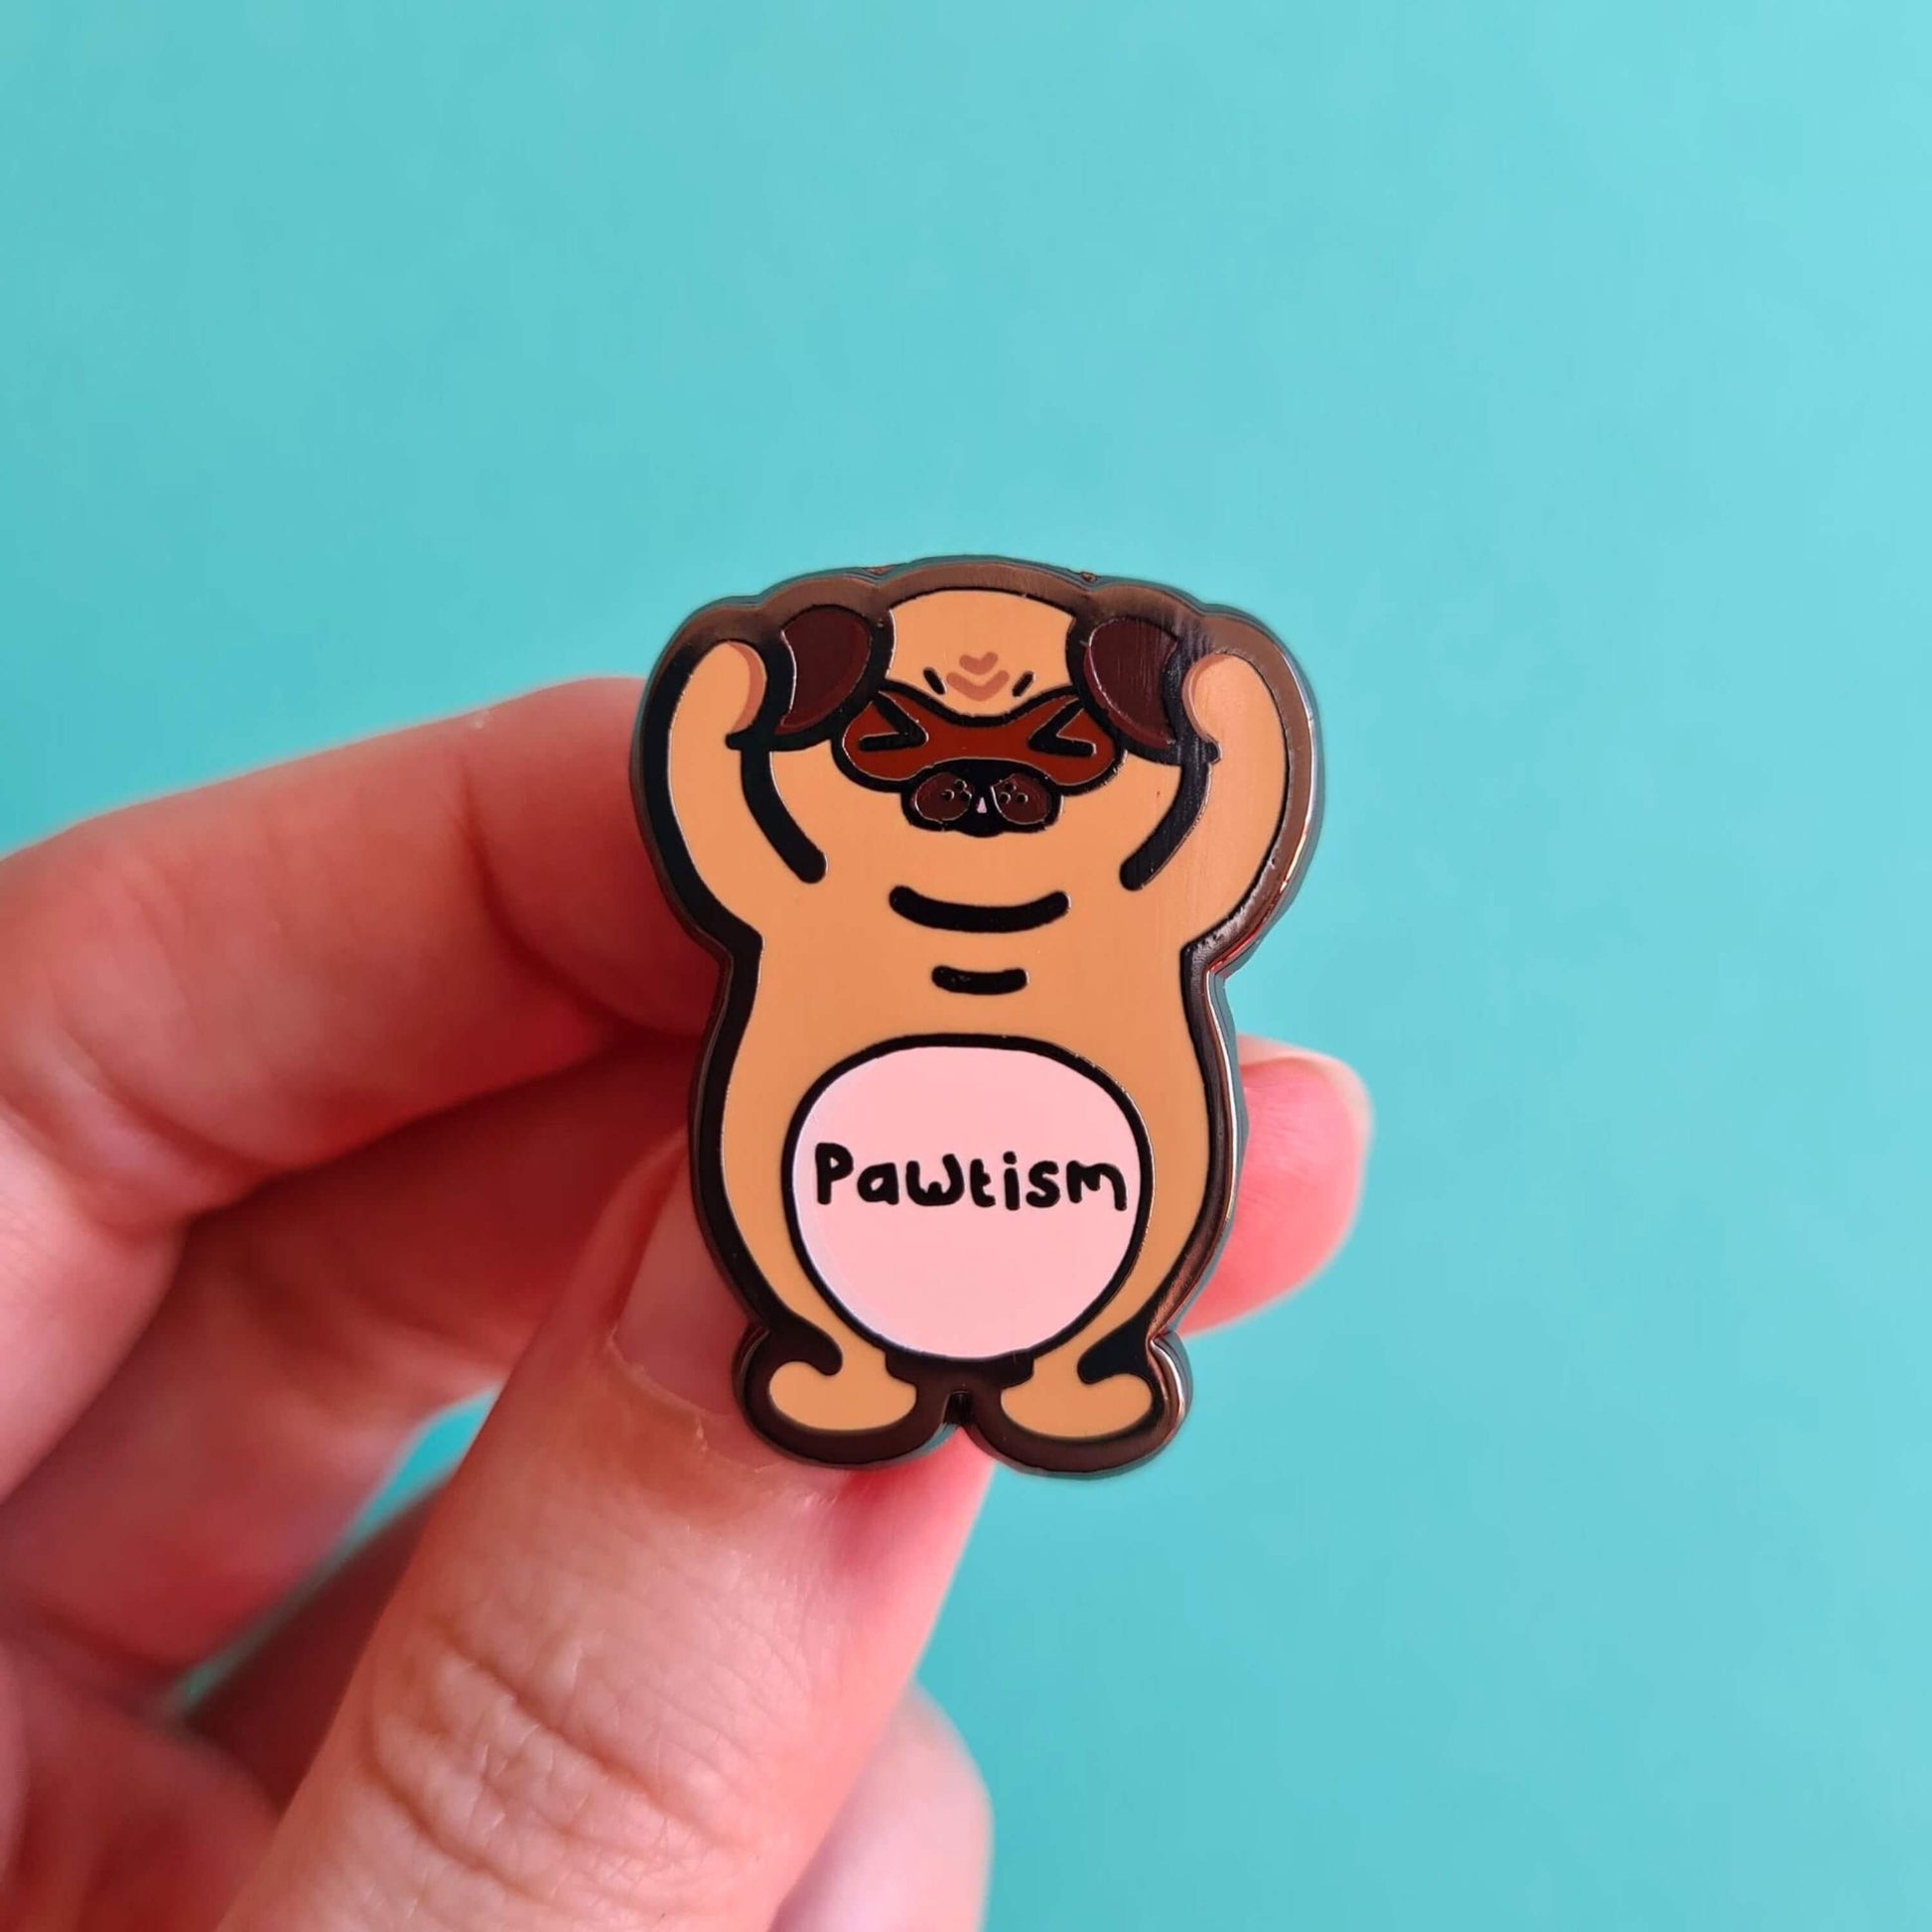 Pawtism Enamel Pin - Autism on a blue background with a hand holding it. The enamel pin is of a brown pug with its hands on its ears and the word pawtism written across its belly. The enamel pin is to raise awareness for neurodiversity and autism.